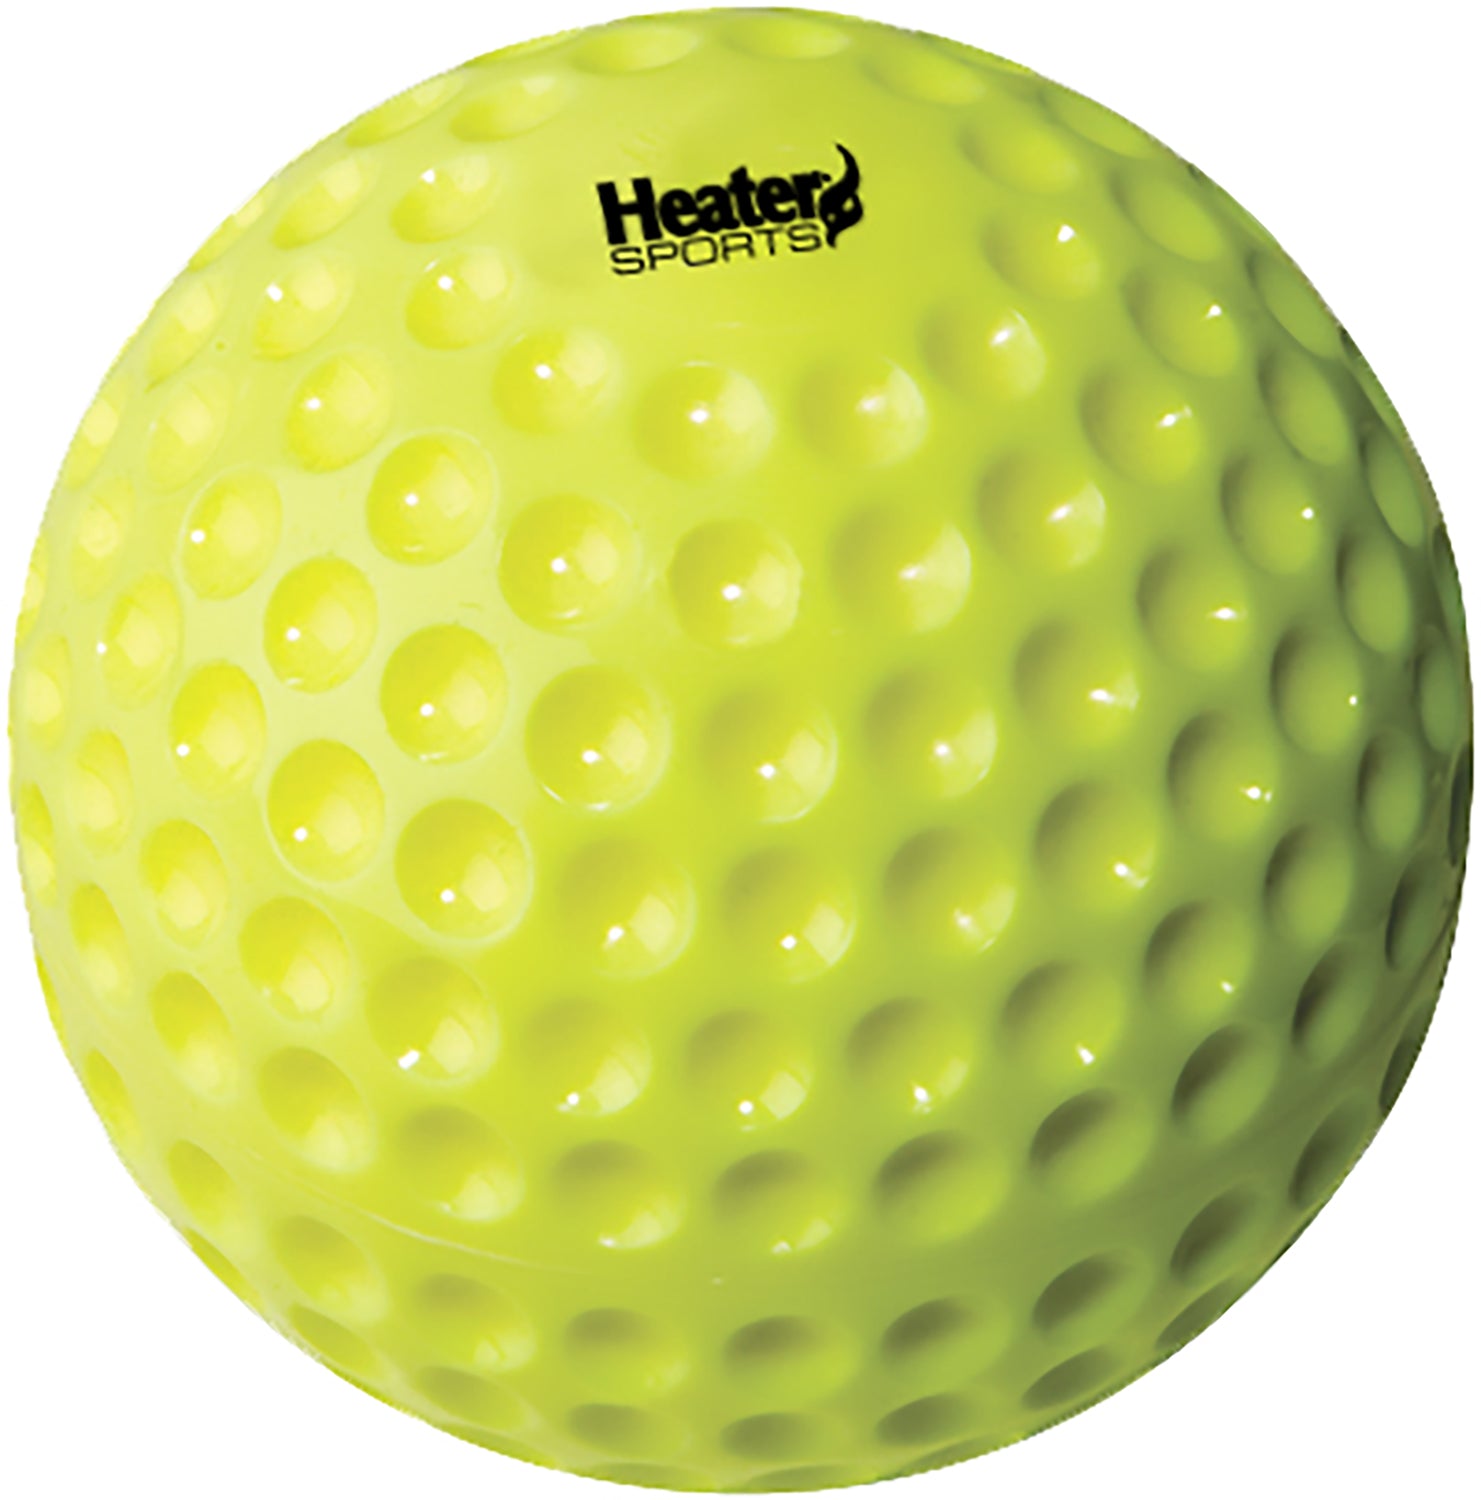 Heater Sports PowerAlley 80 MPH and Trend Sports Sandlot 40 MPH Lite Balls (6 Pack) - Pro-Distributing